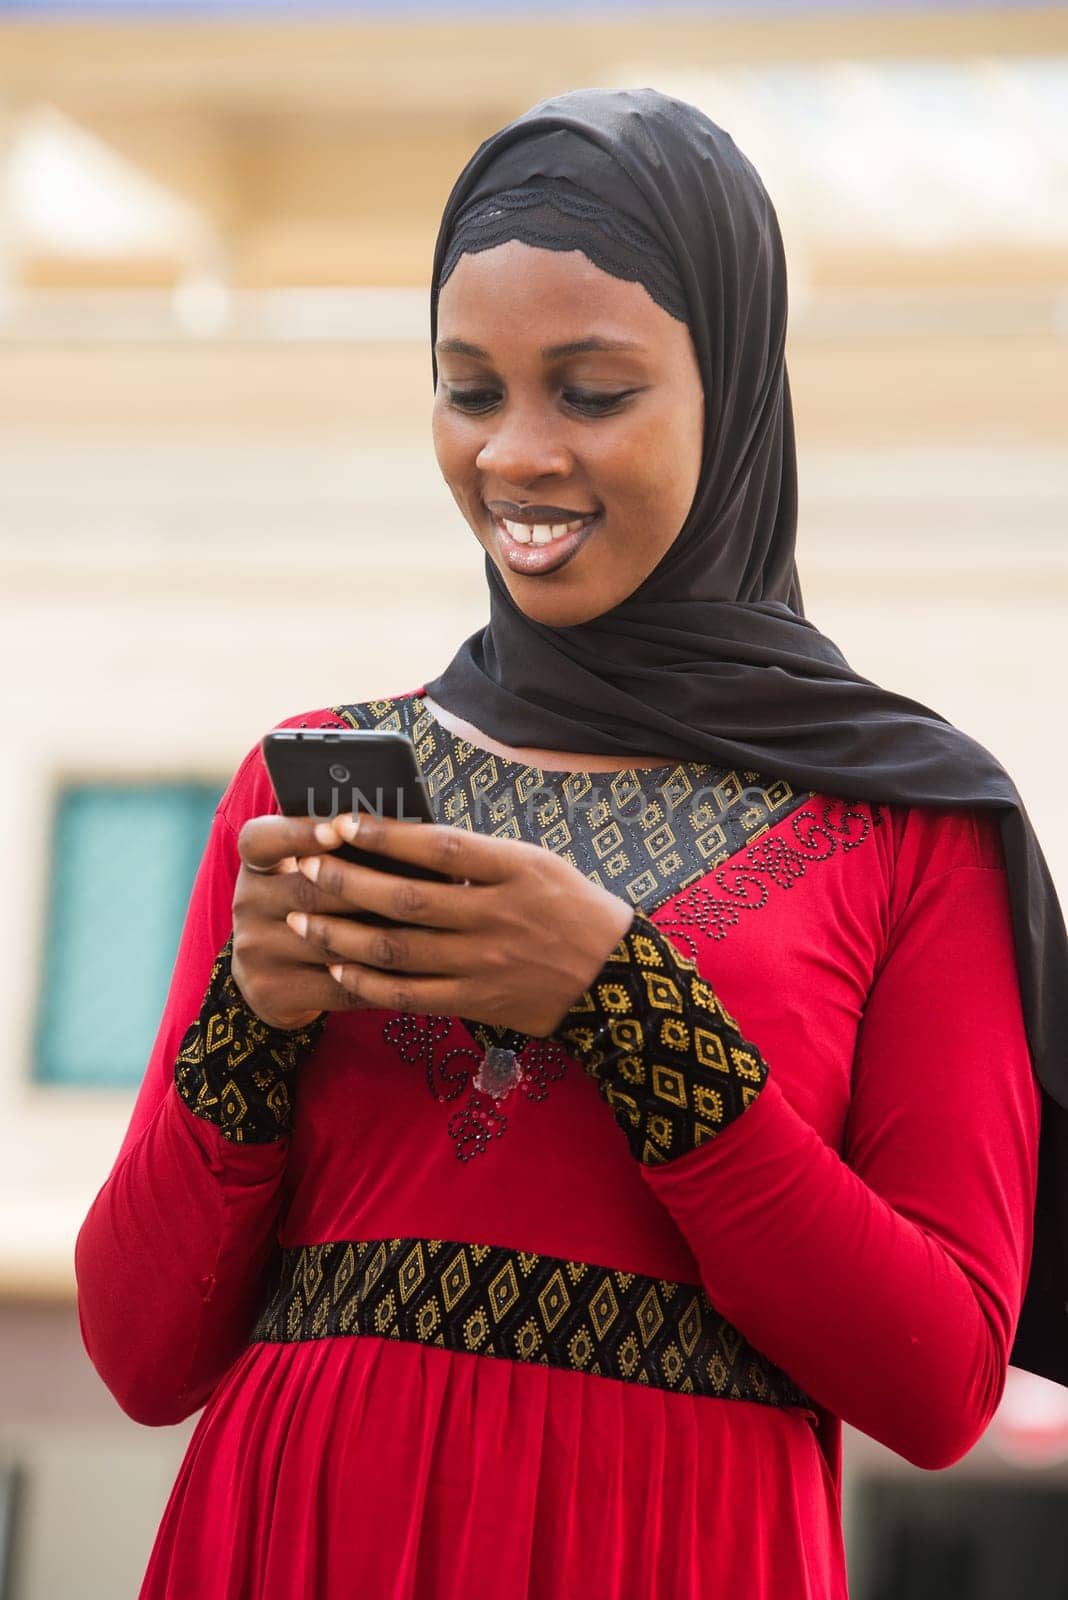 young woman standing outdoors with veiled head looking at mobile phone while smiling.